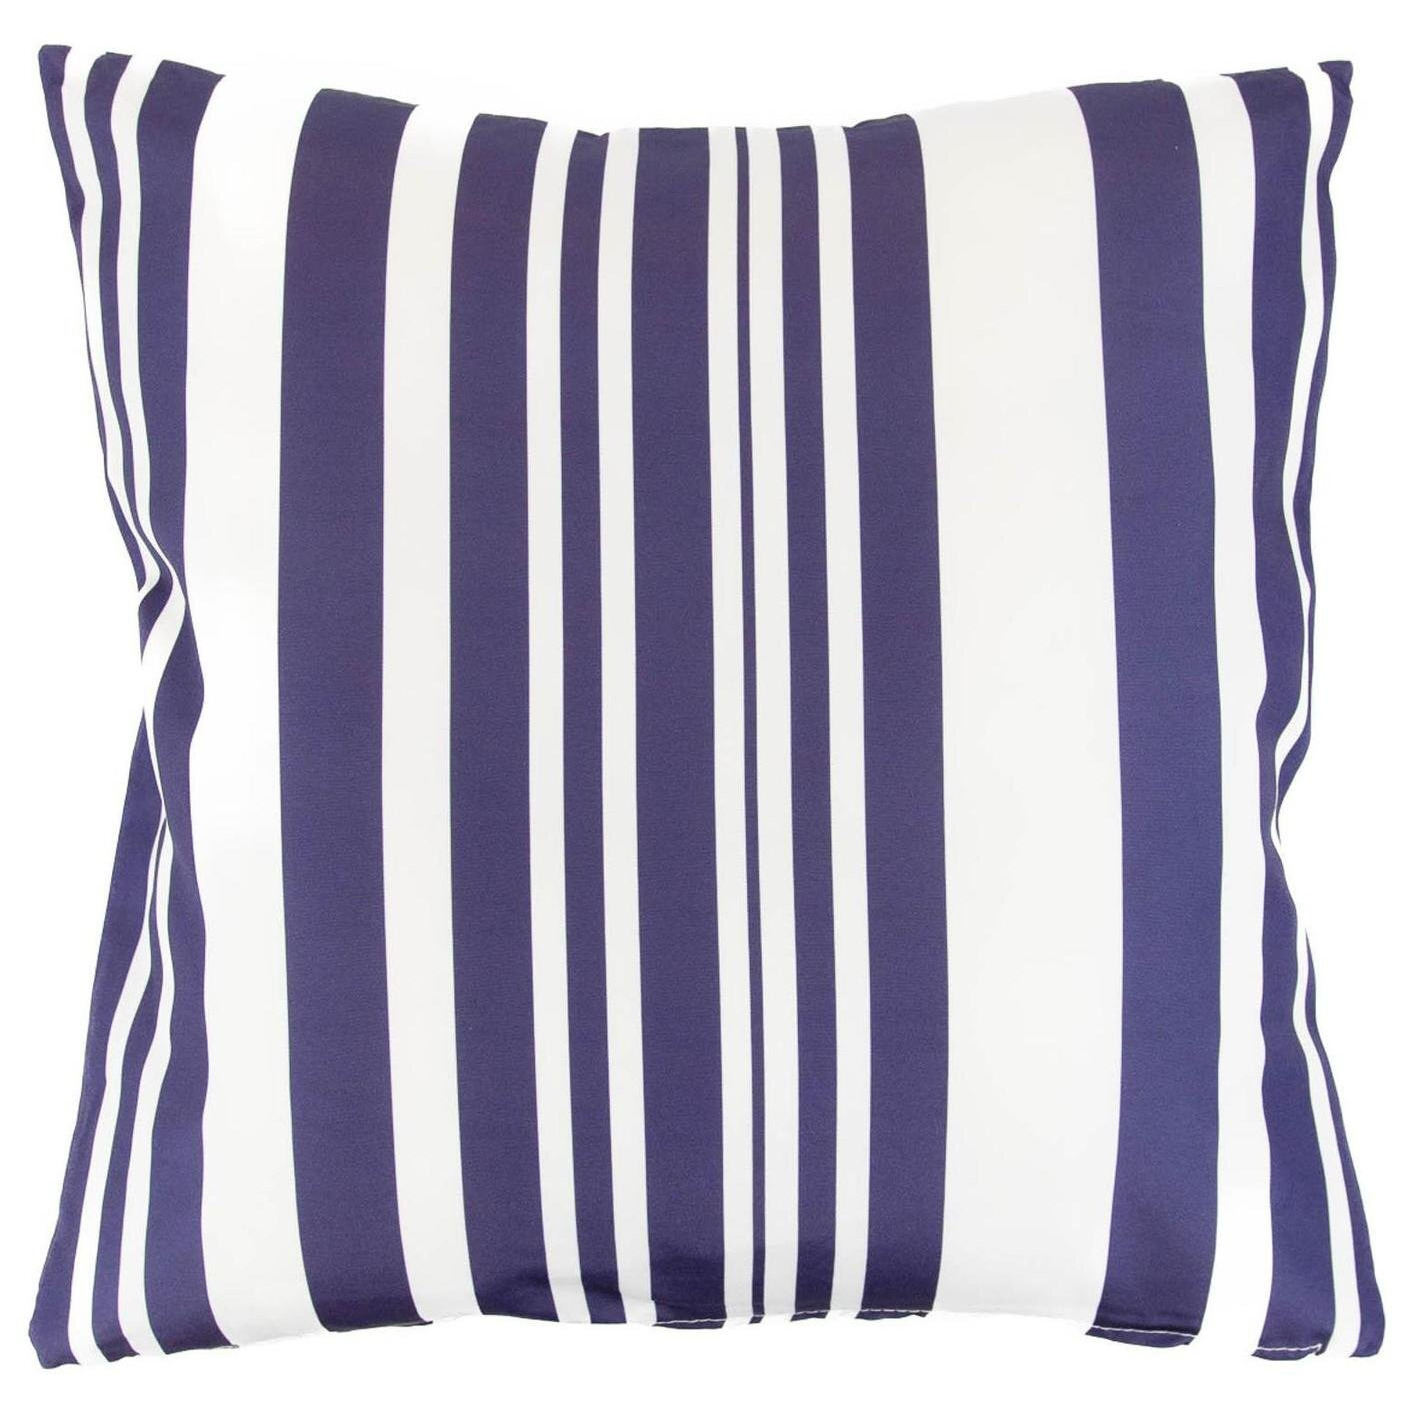 Streetwize Blue Stripes Outdoor Cushion - Pack of 4 - image 1